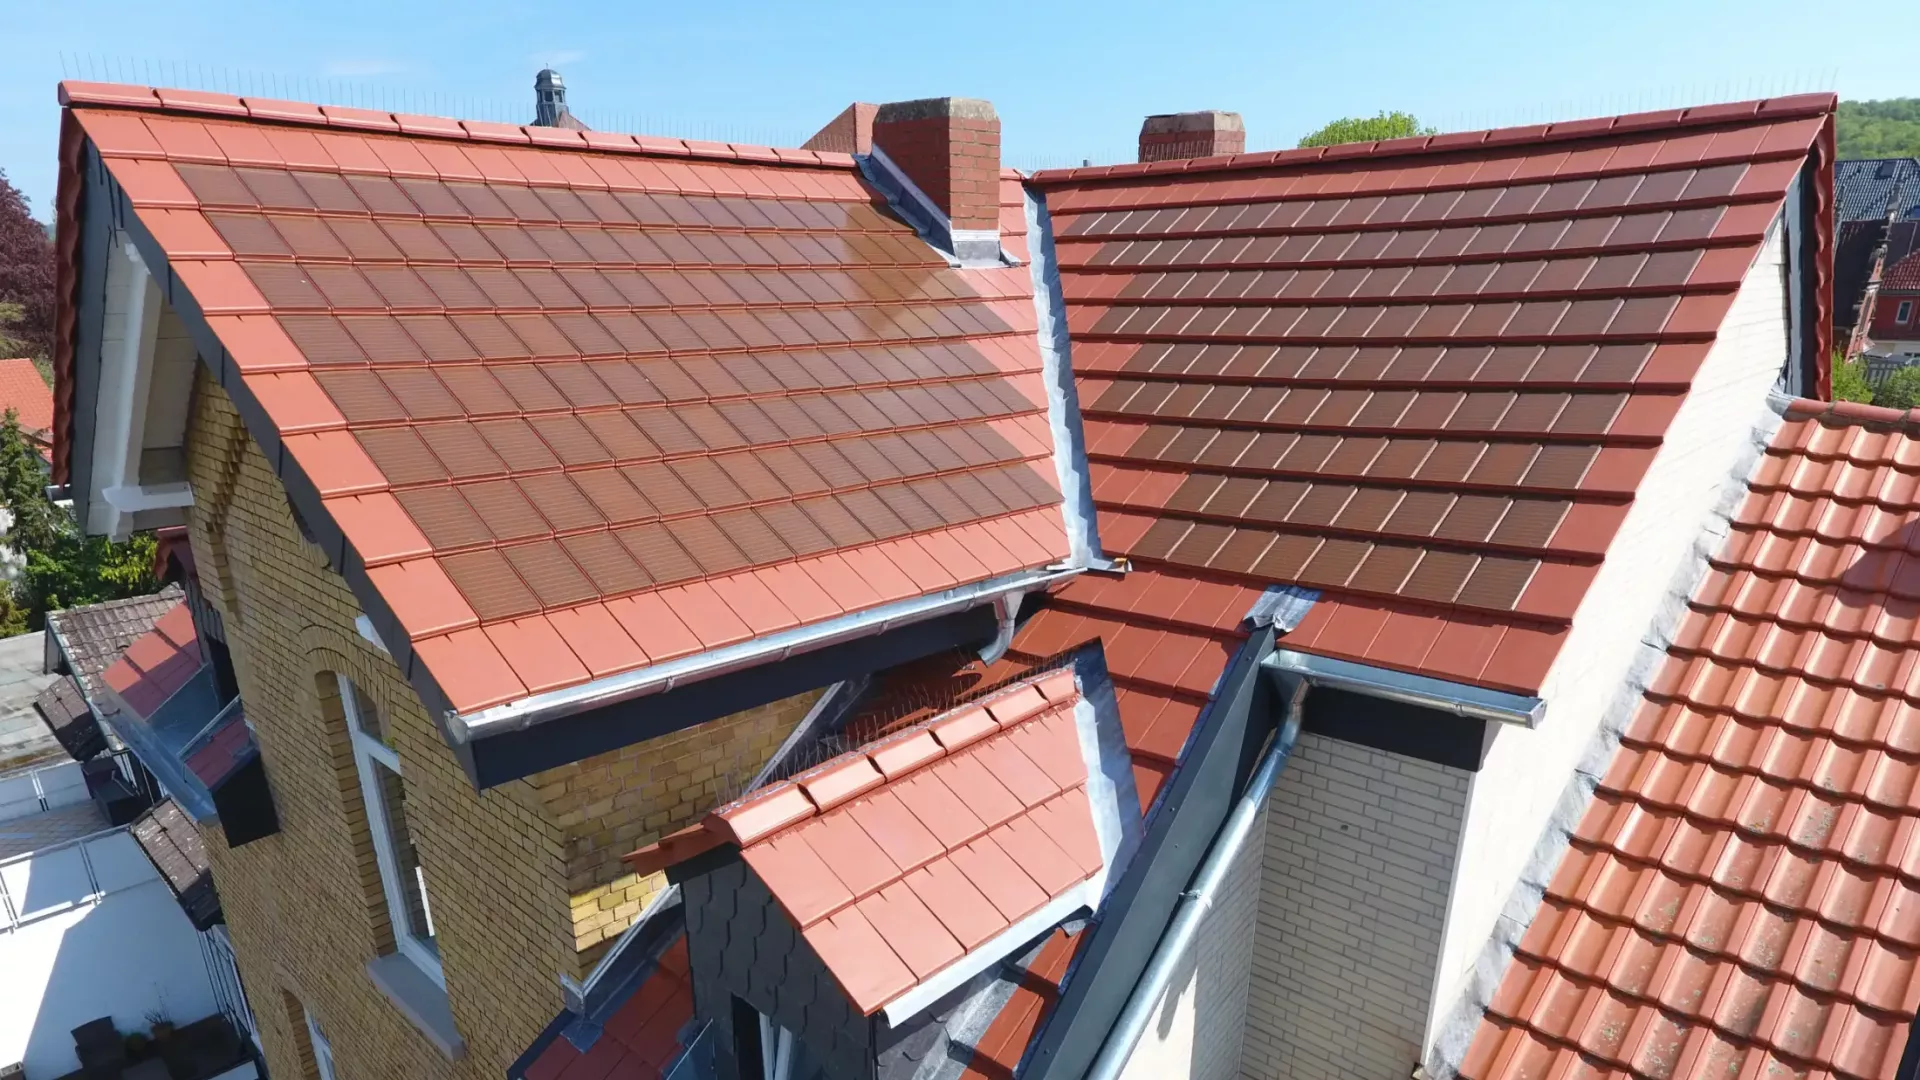 Stolberg roofing